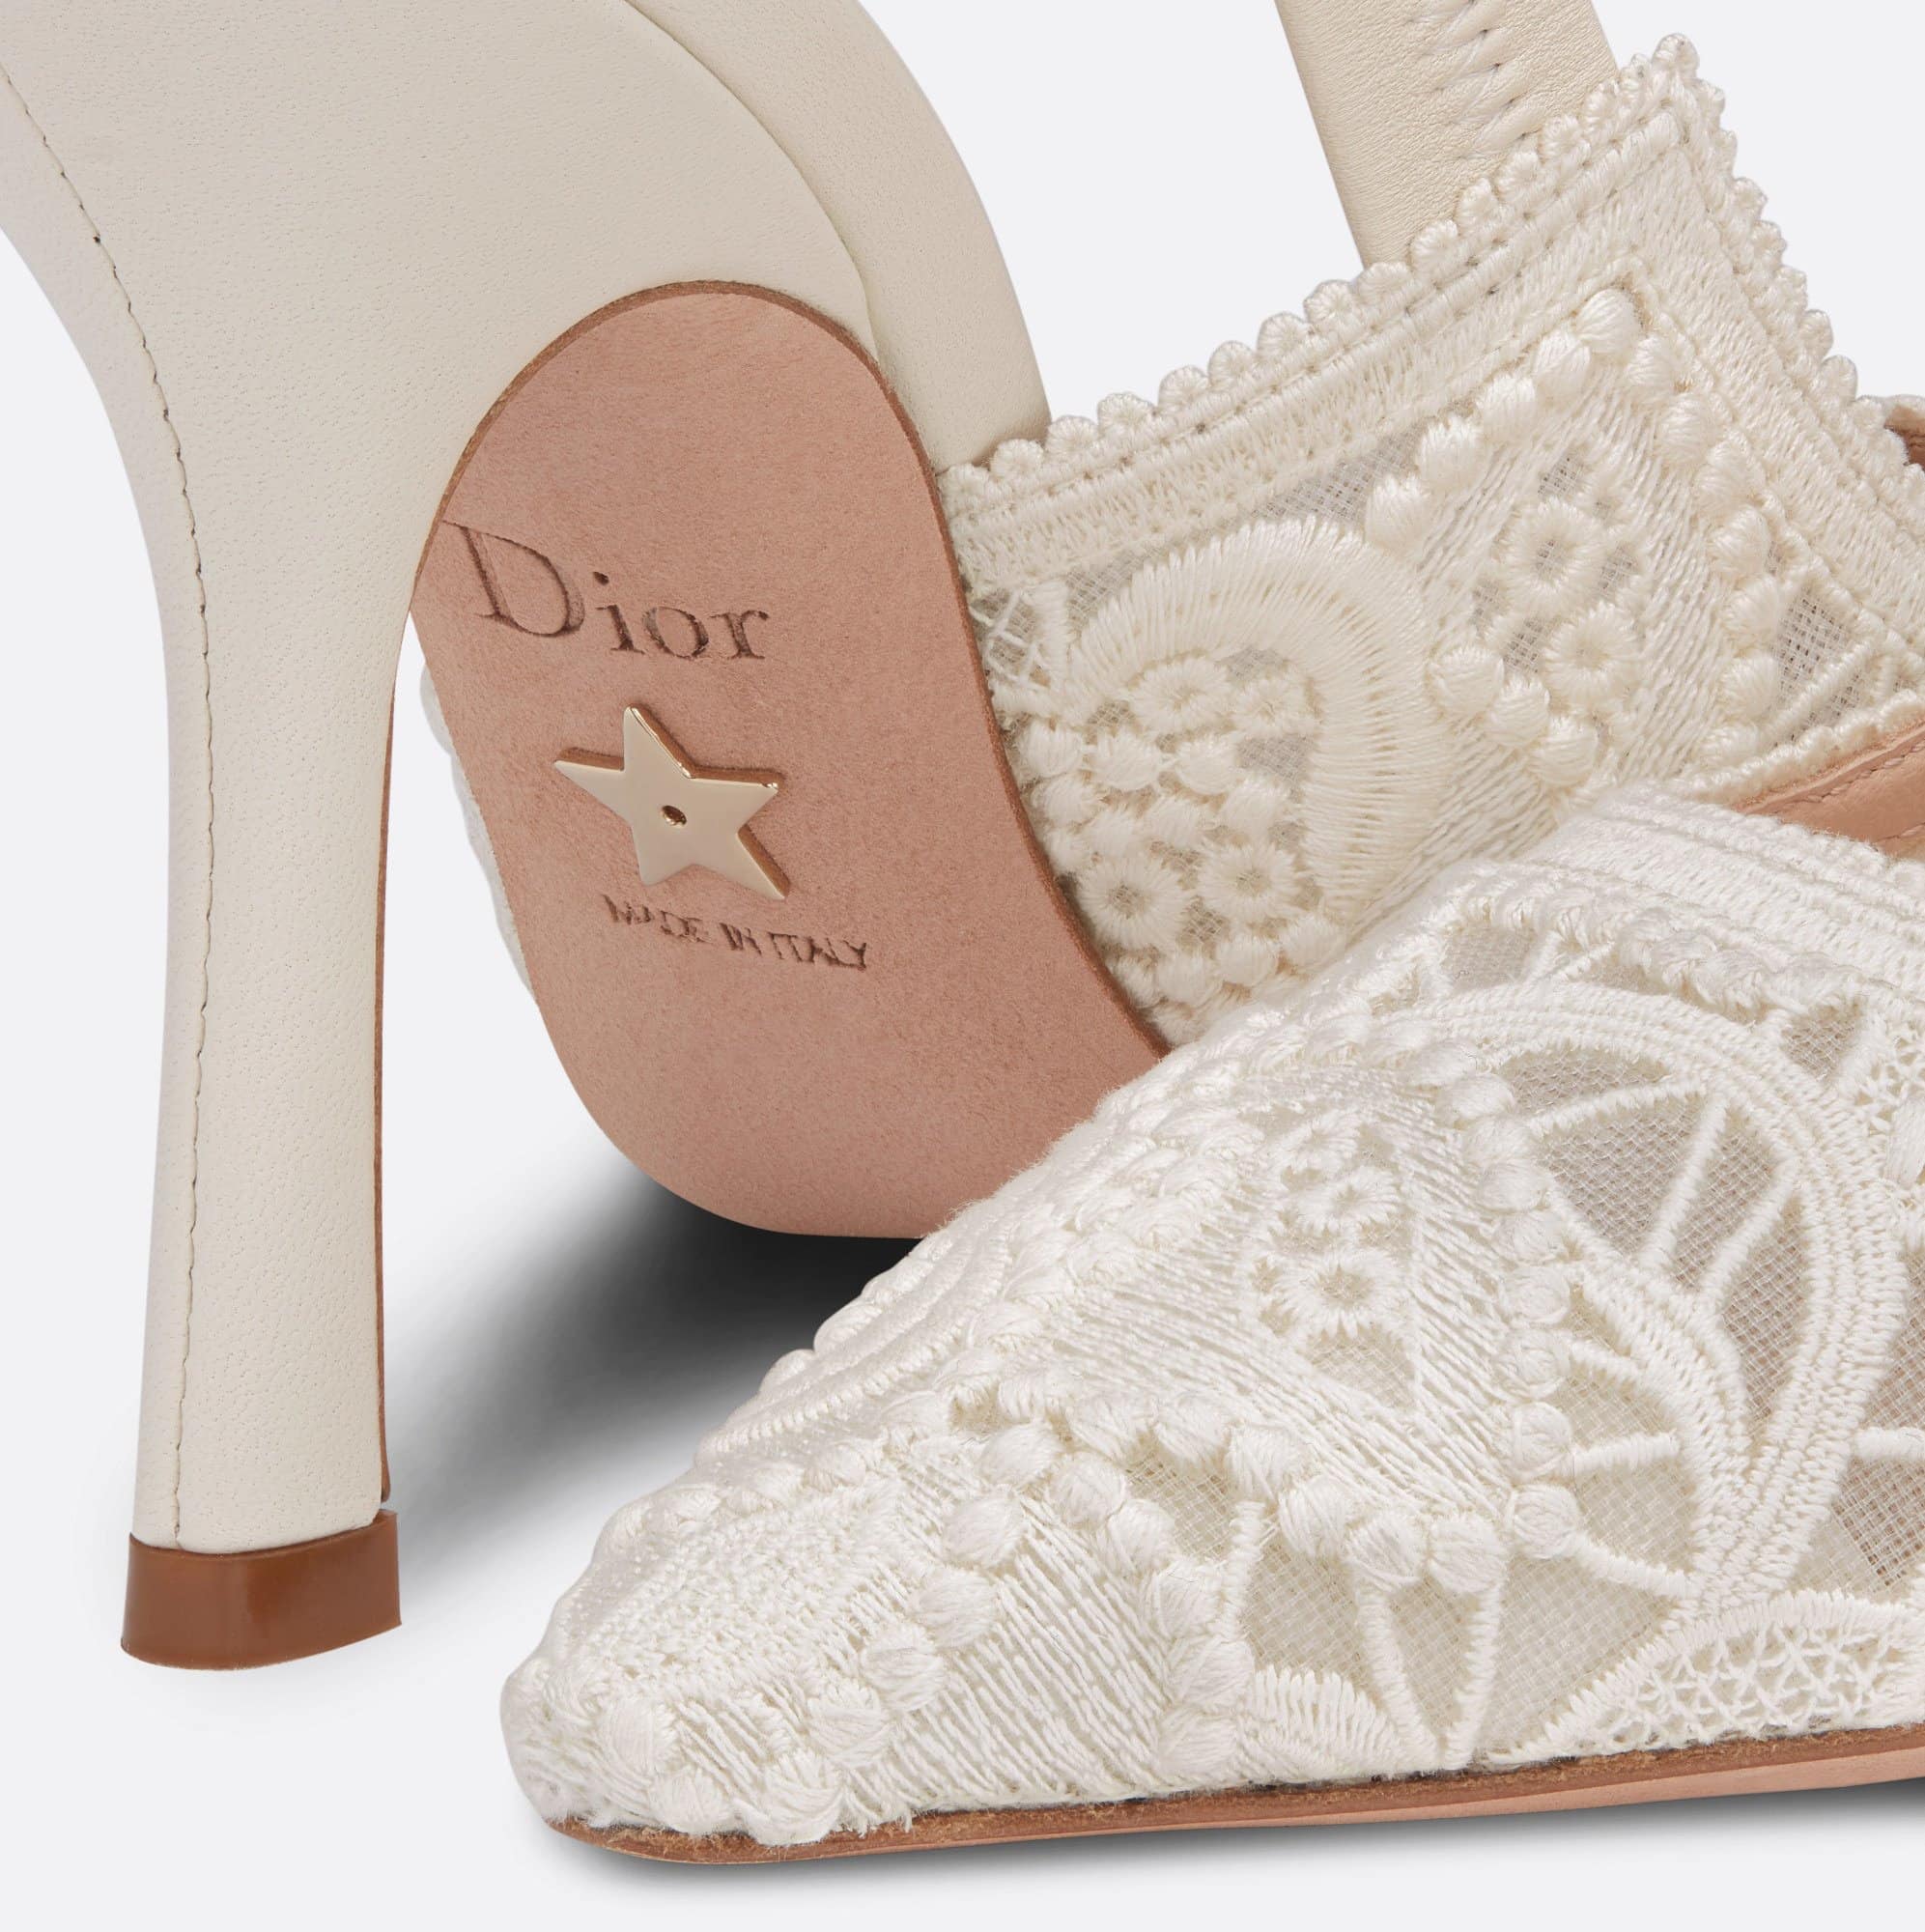 All Dior shoes should have a 'made in' stamp from their country of origin, either Italy or Spain